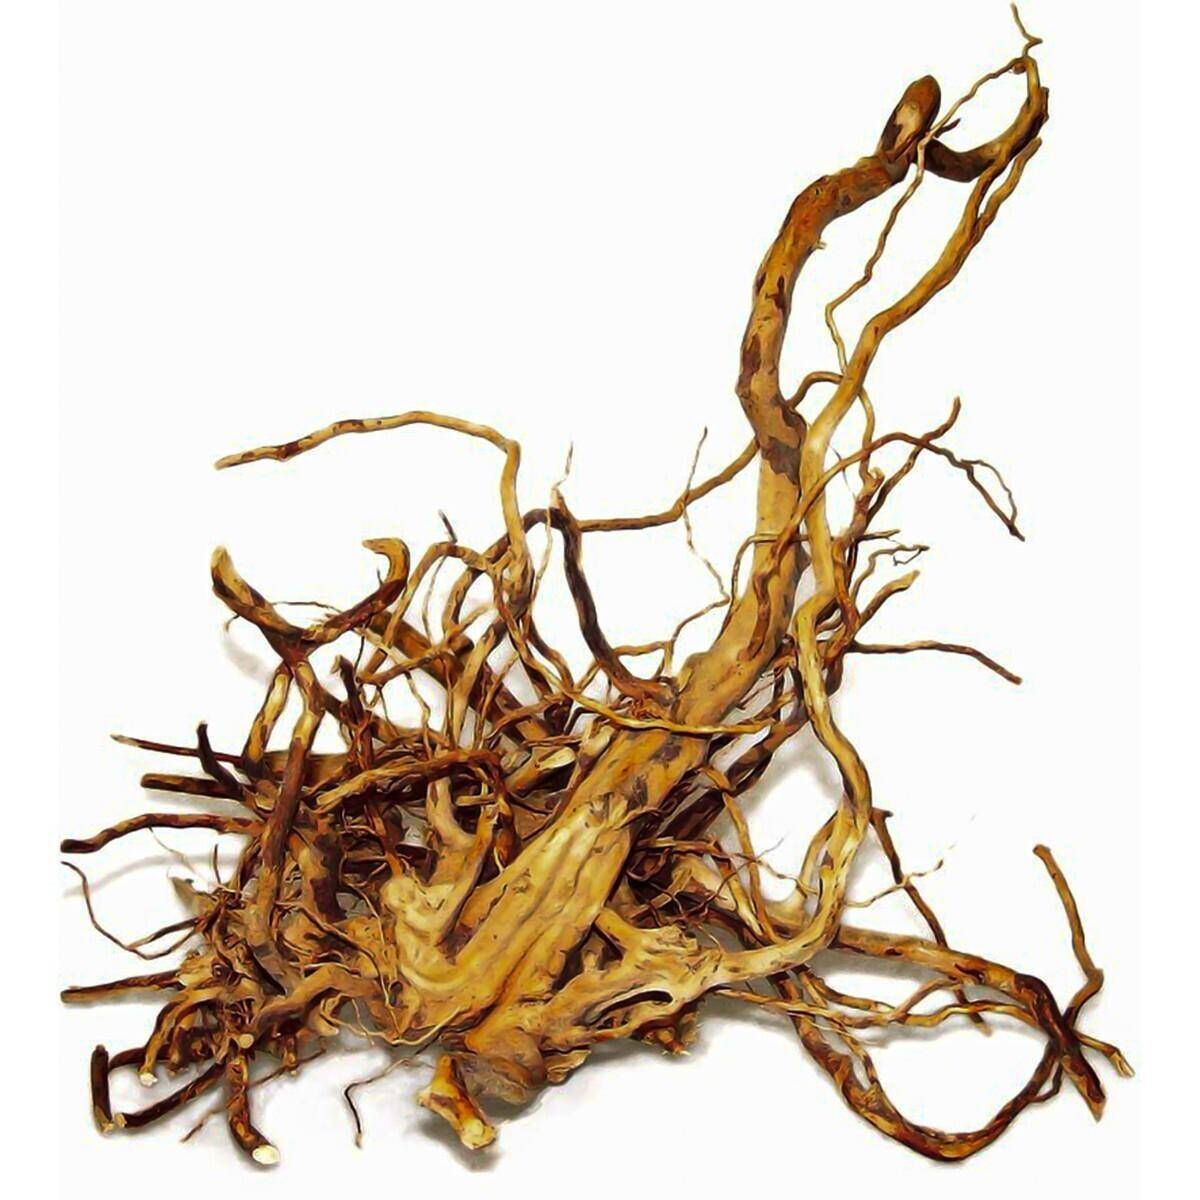 JAPANESE ROOT XXL size 1 piece (S-D128OR)